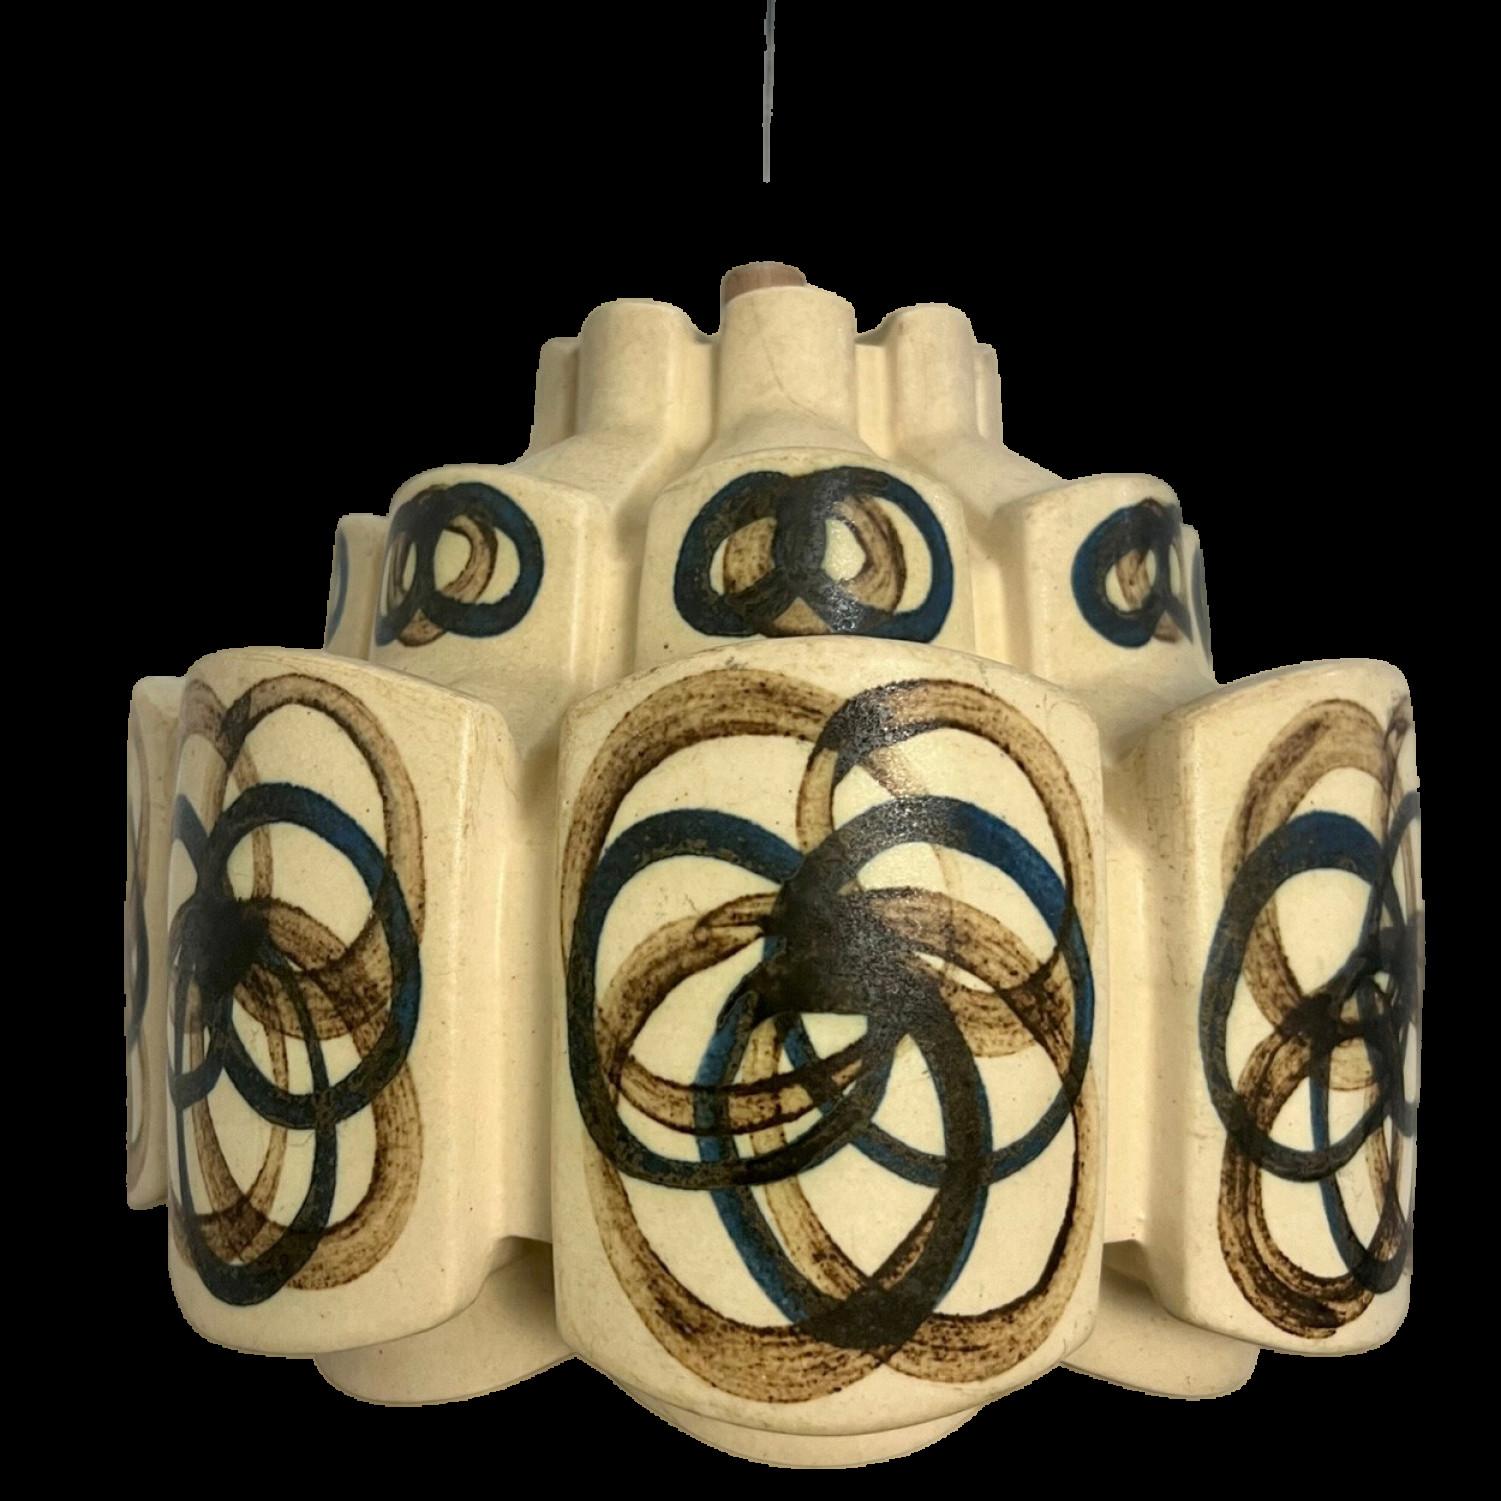 An exquisite hanging lamp with an unusual shape, made with rich colored ceramic with the shape of a flower in darker ceramic, manufactured in the 1970s in Denmark.

With beautiful fragile steel cable and wooden details. Hanging on a steel cable the